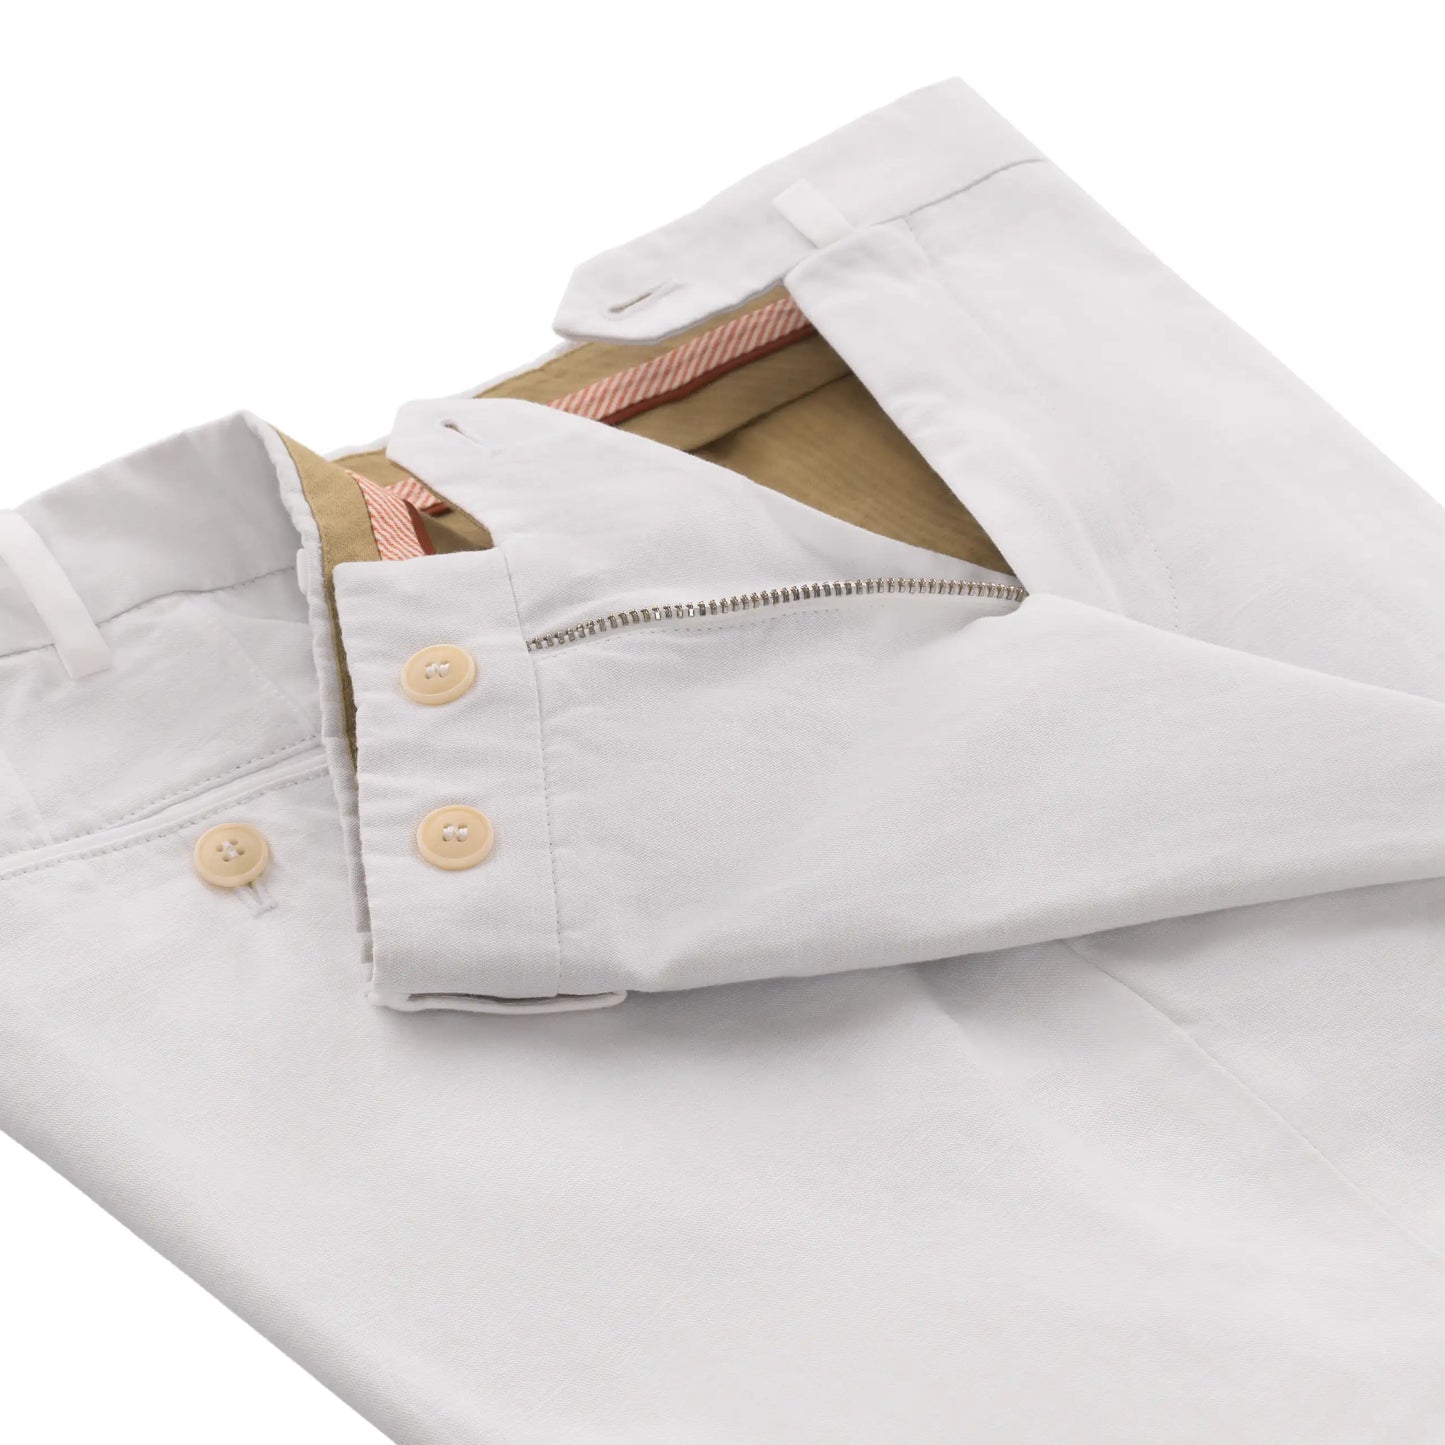 Slim-Fit Cotton-Blend Summer Trousers in White